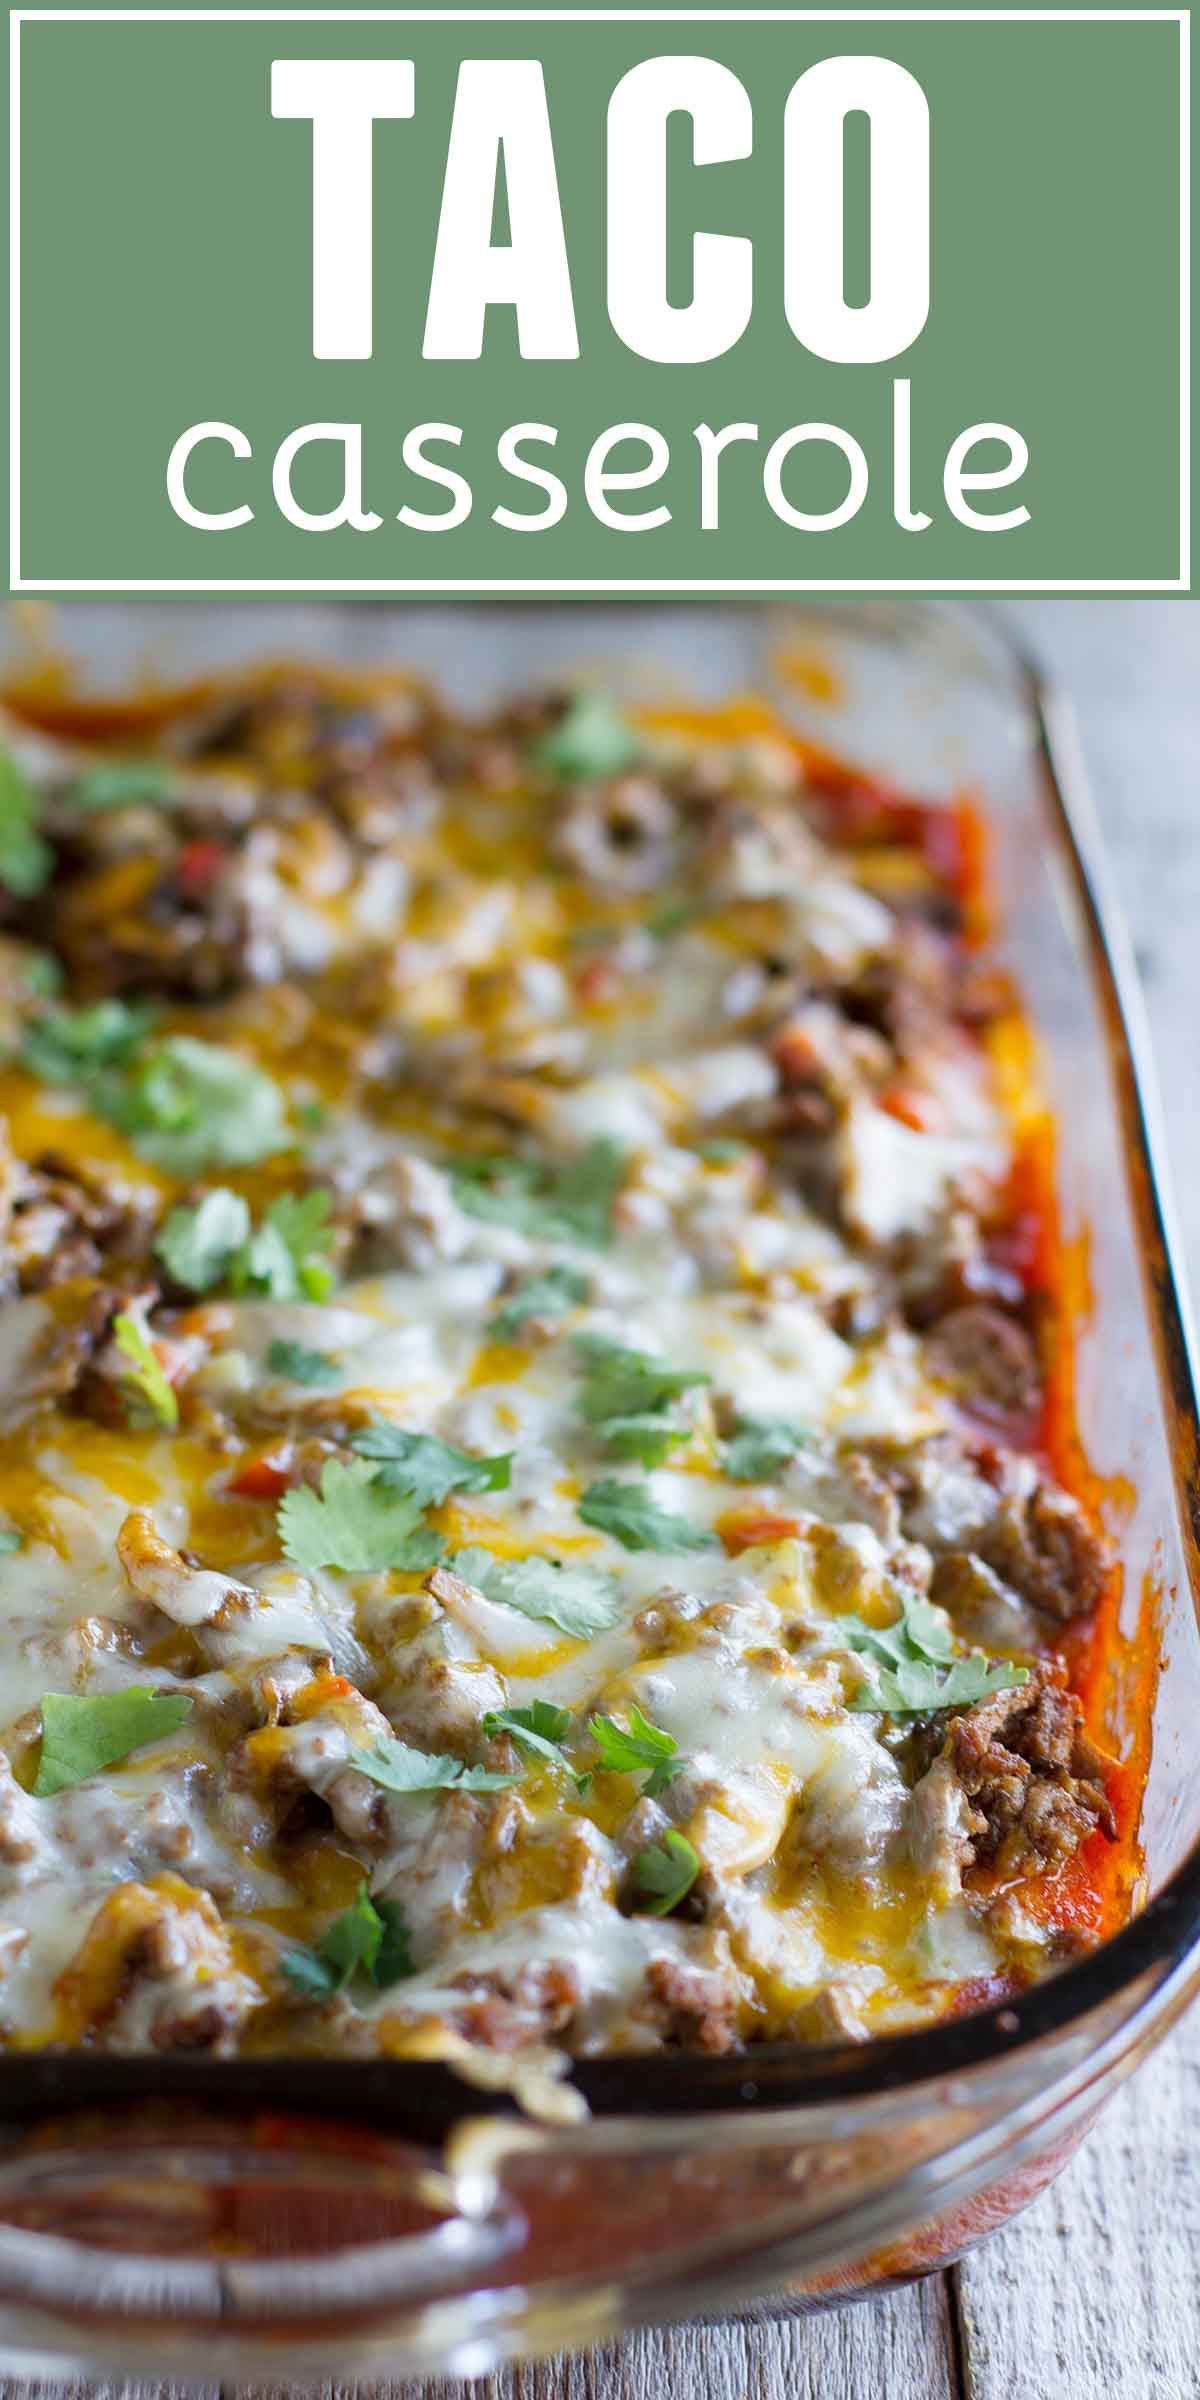 Biscuits are coated in taco sauce then topped with spiced ground beef and lots of cheese in this family friendly Taco Casserole. -   21 spicy hamburger recipes
 ideas